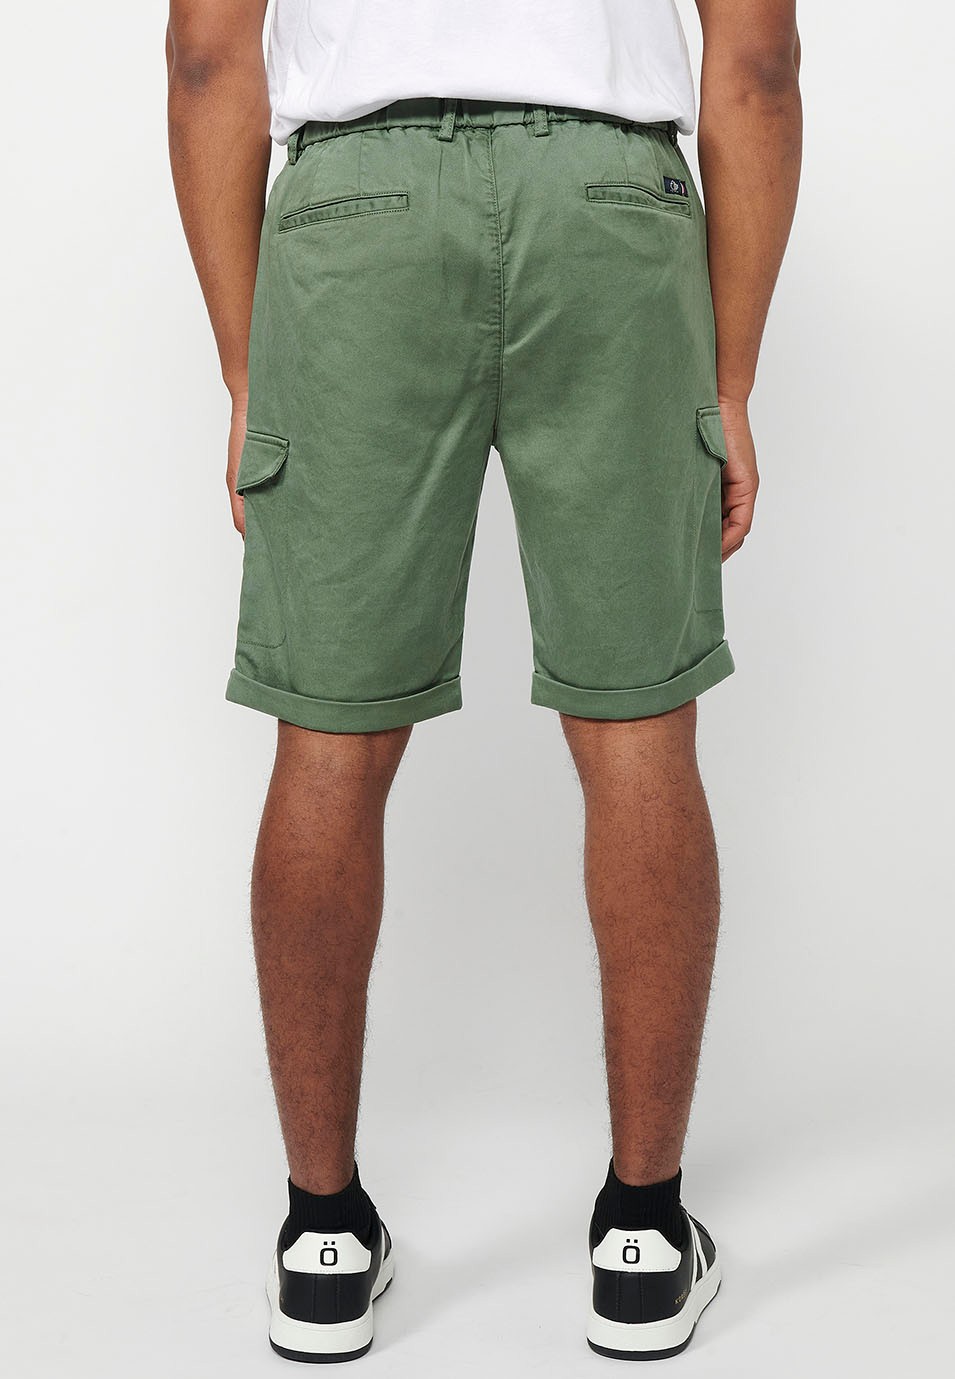 Shorts with rubberized waist and zipper and button closure with pockets, two sides with flap in Green for Men 2